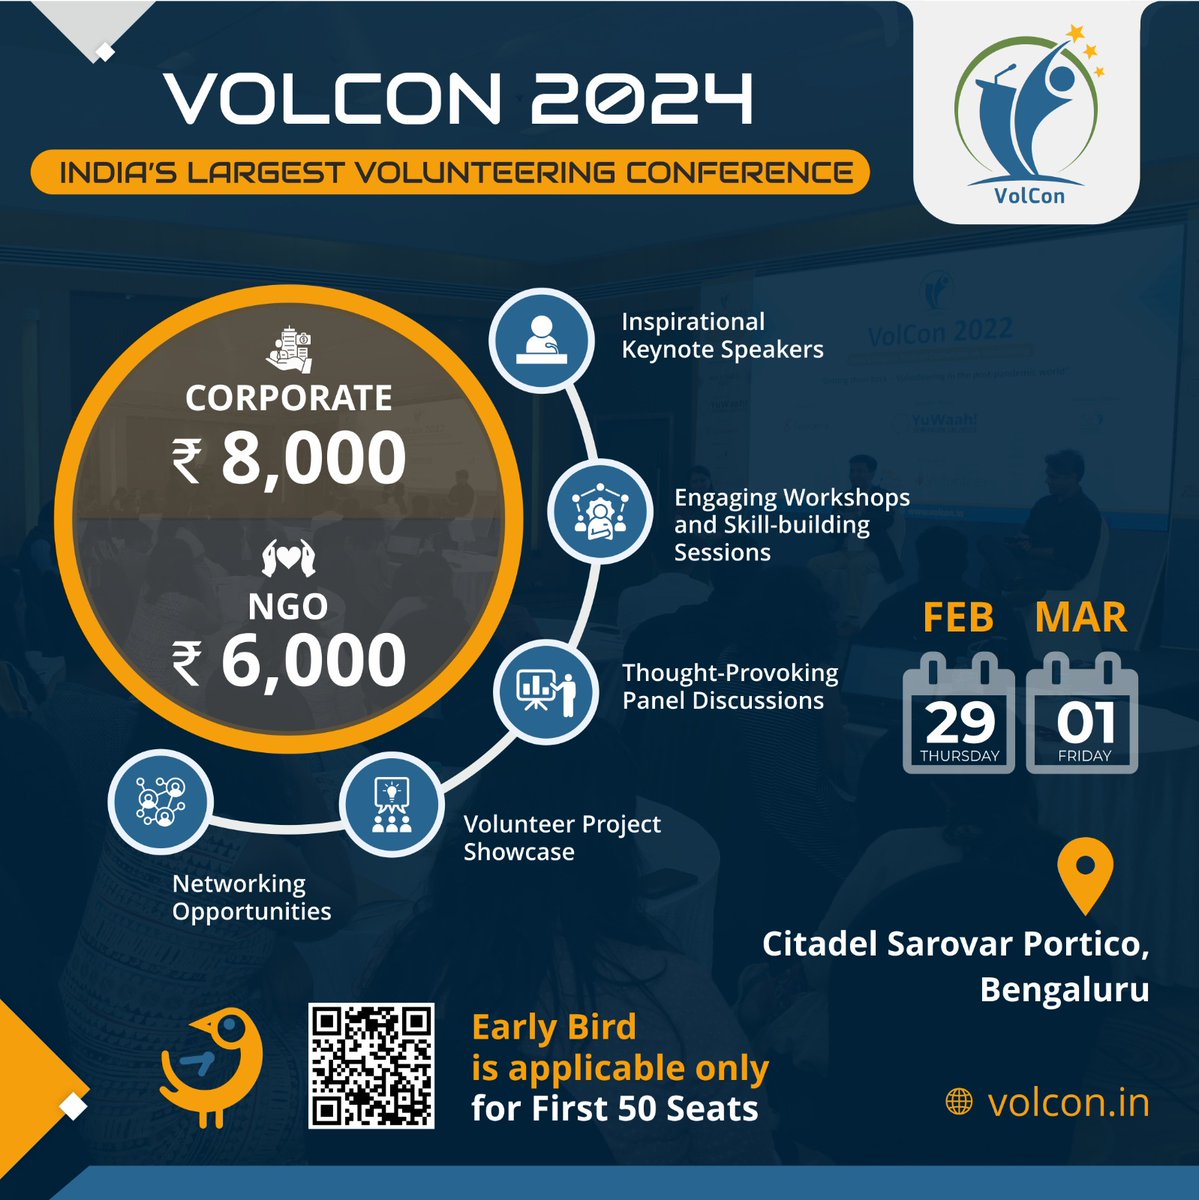 📢 Join #VolCon - India's Flagship Volunteering Conference 2024 with #EarlyBirdOffer.

🎟️ Early-bird discounted registration offer valid till Jan 5th for NGOs & Jan 12th for corporates.
🎉 Secure your spot with our exclusive offer available for the first 50 registrations only.